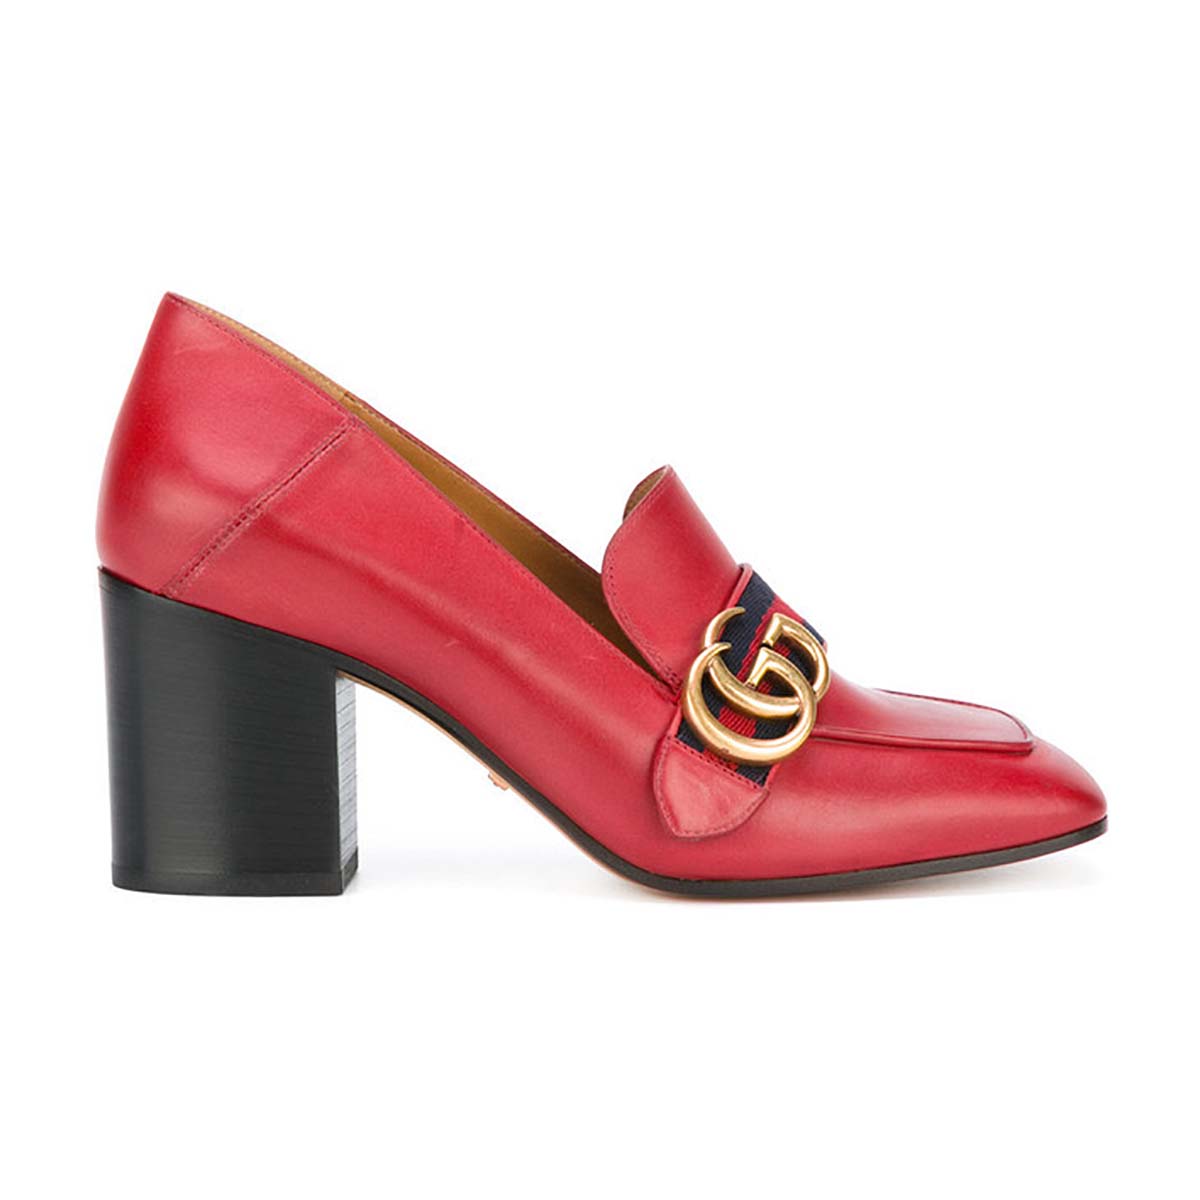 Gucci Women Leather Mid-Heel Loafer Shoes-Red - LULUX